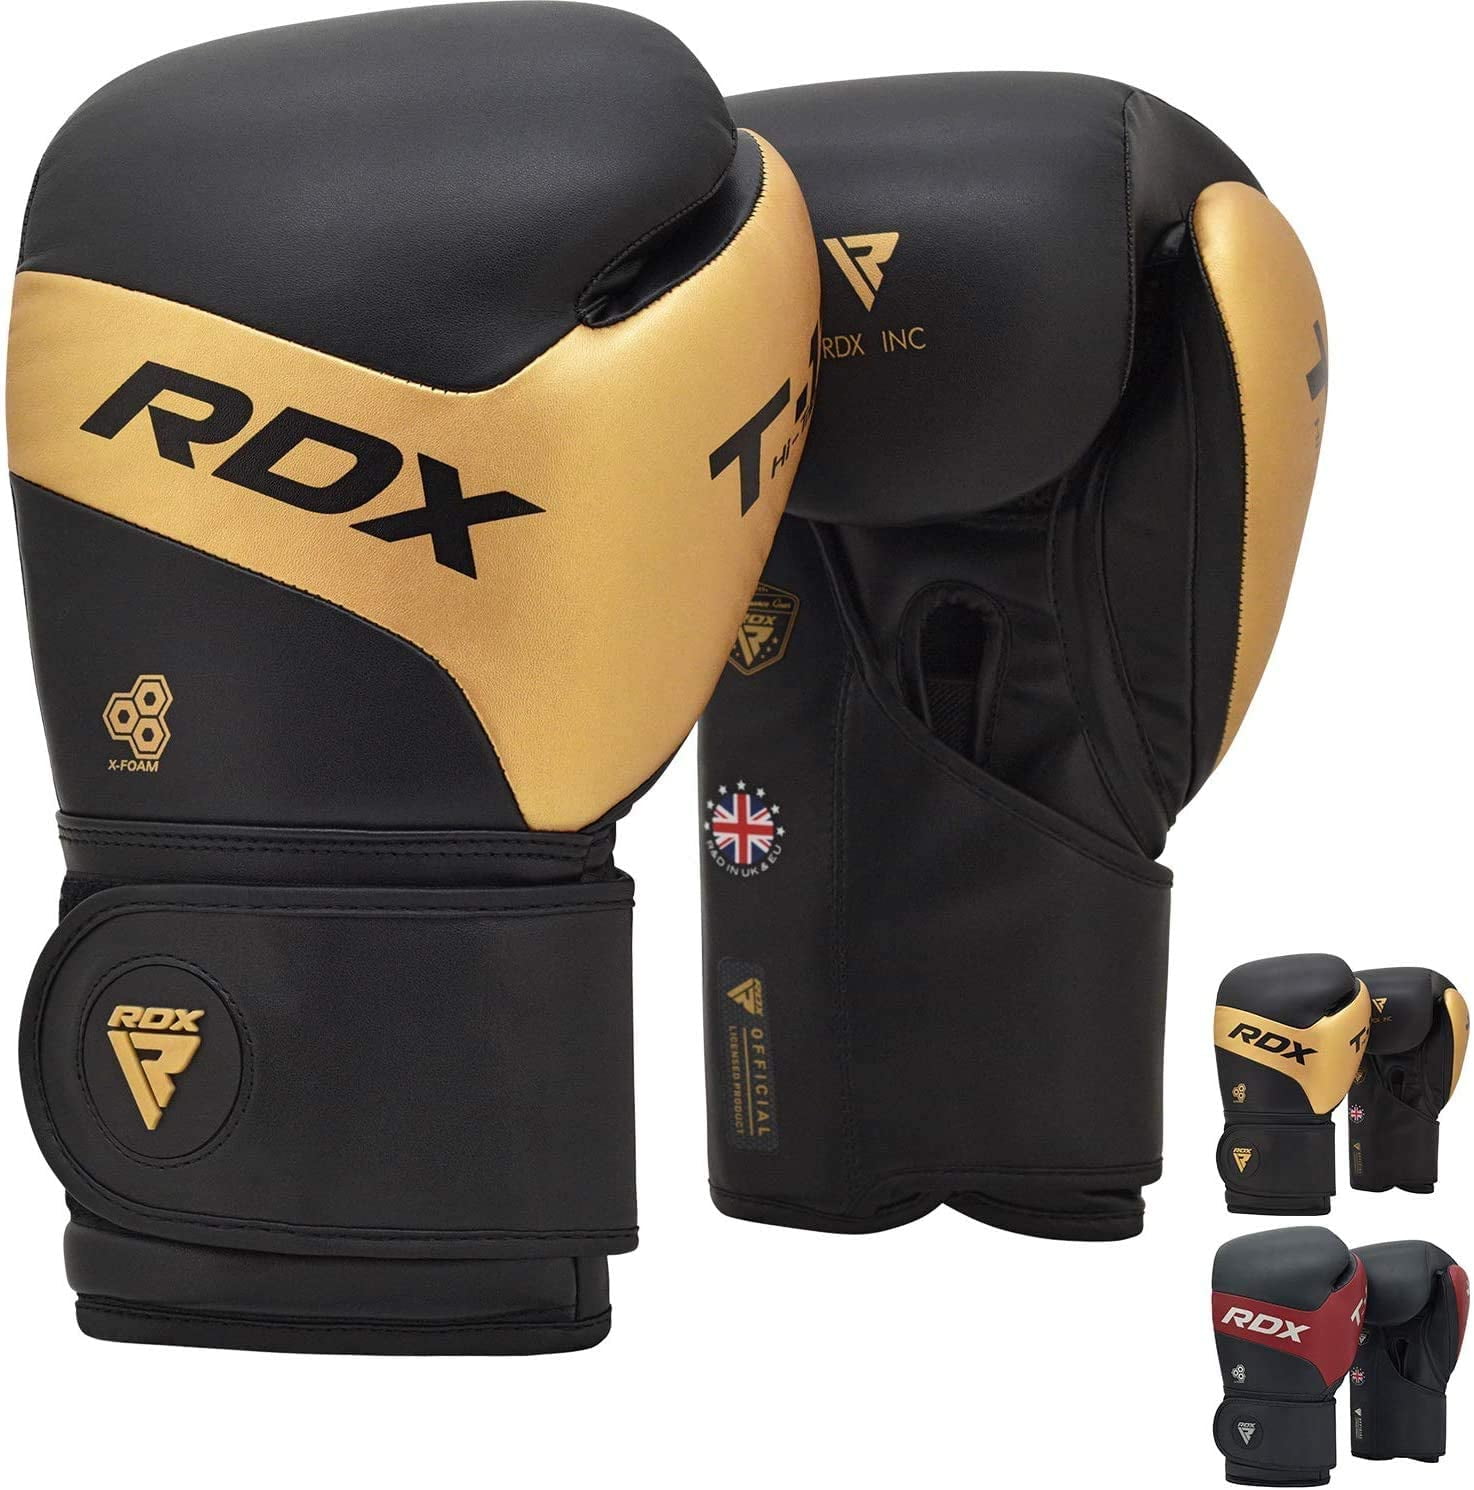 RDX RDX Boxing Gloves Sparring MMA Muay Thai Training Kickboxing Mitts Punch Bag 